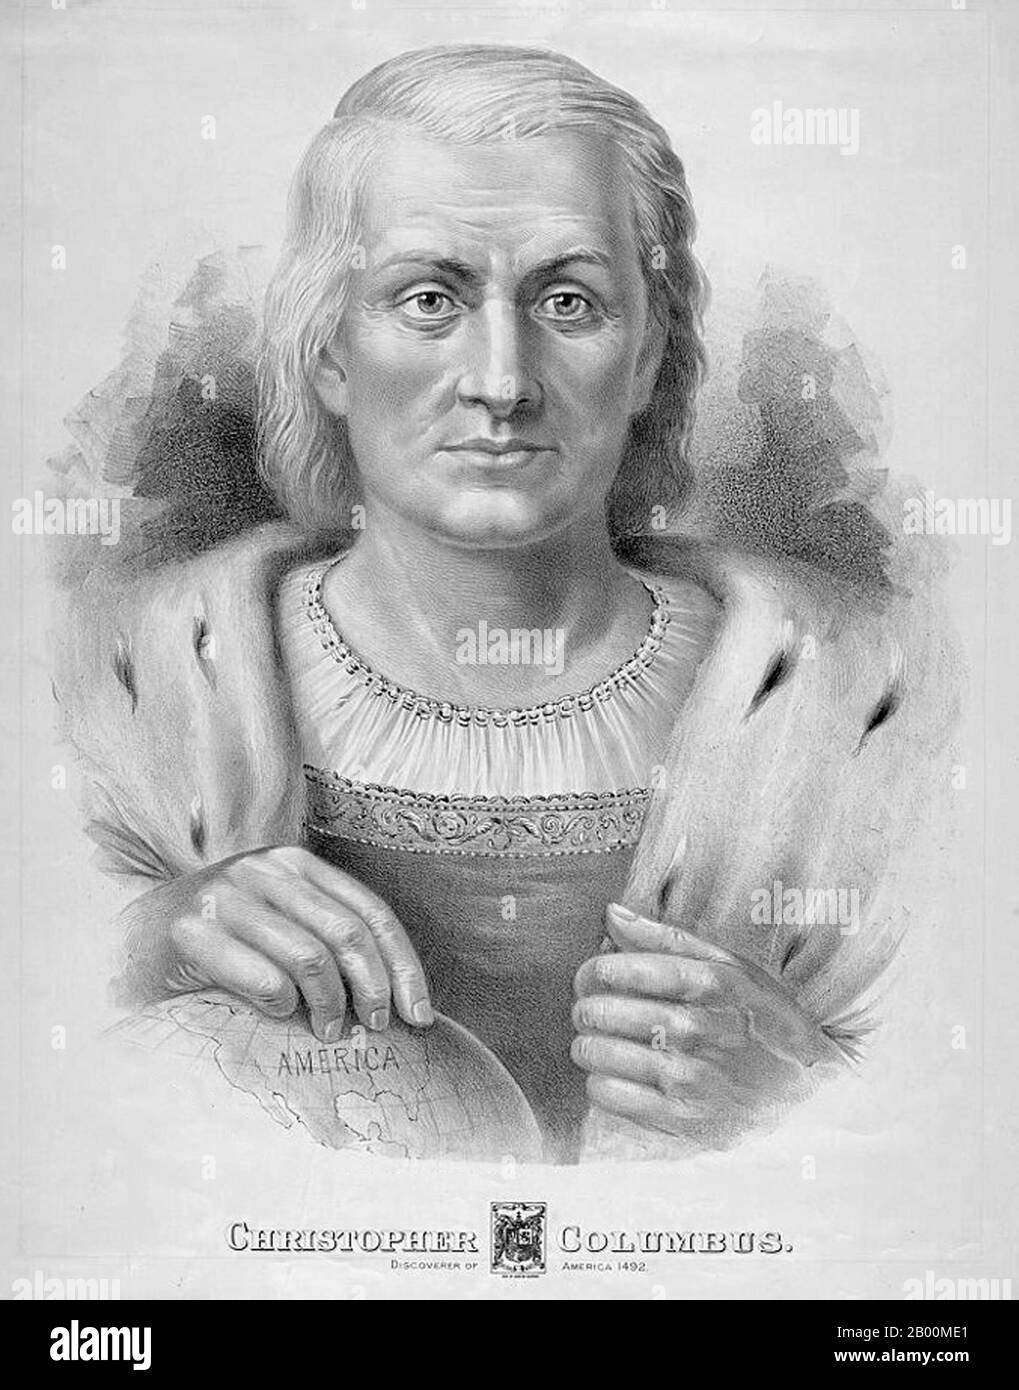 Italy: Christopher Columbus (1451 – 1506) by Currier and Ives, 1892.  Christopher Columbus (c. 31 October 1451 – 20 May 1506) was a navigator, colonizer, and explorer from Genoa, Italy, whose voyages across the Atlantic Ocean led to general European awareness of the American continents in the Western Hemisphere. With his four voyages of exploration and several attempts at establishing a settlement on the island of Hispaniola, all funded by Isabella I of Castile, he initiated the process of Spanish colonization which foreshadowed general European colonization  of the 'New World'. Stock Photo